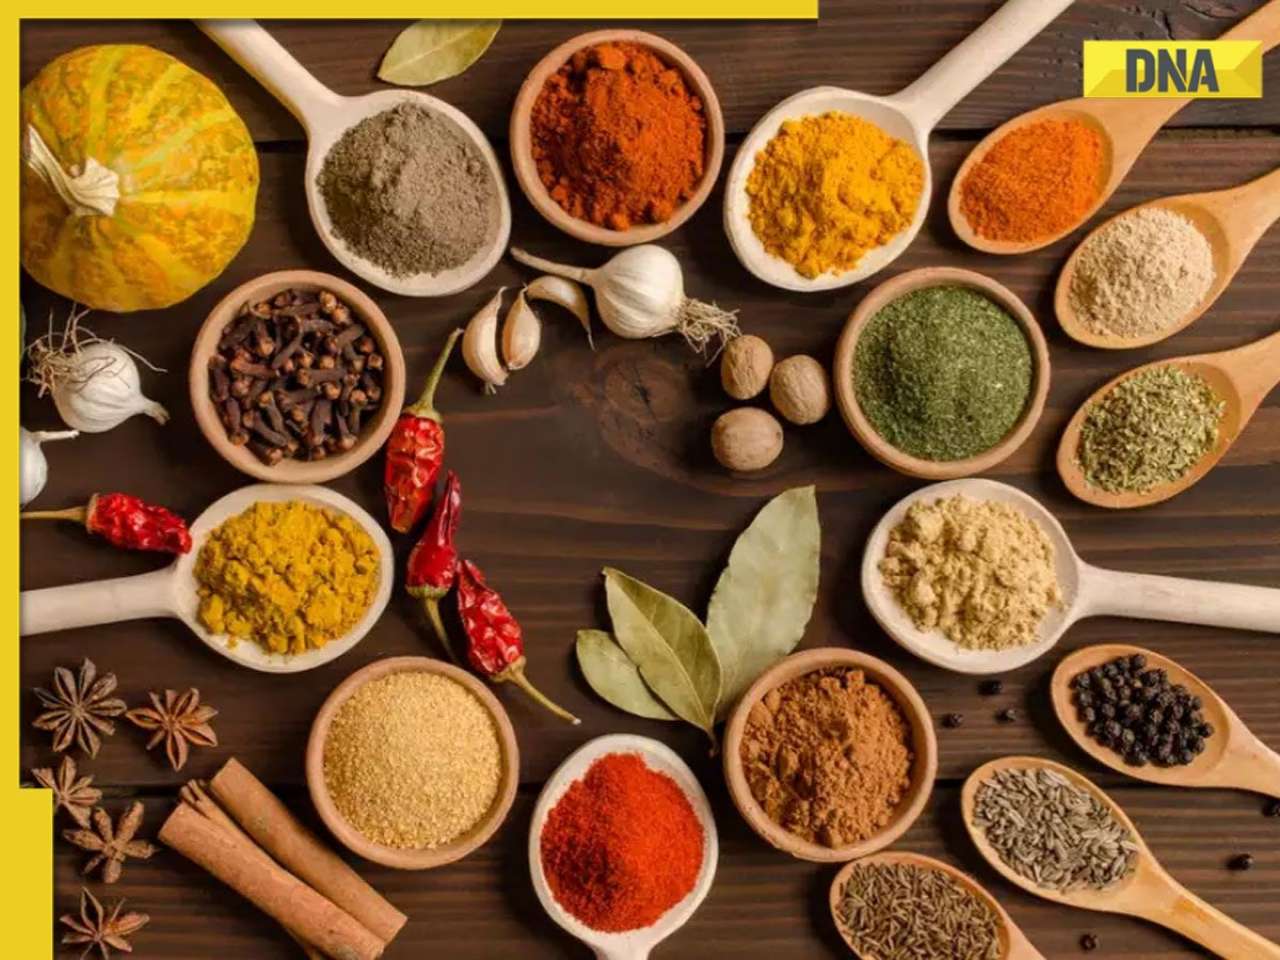 India widens crackdown on spices, orders nationwide testing, inspections on all manufacturers